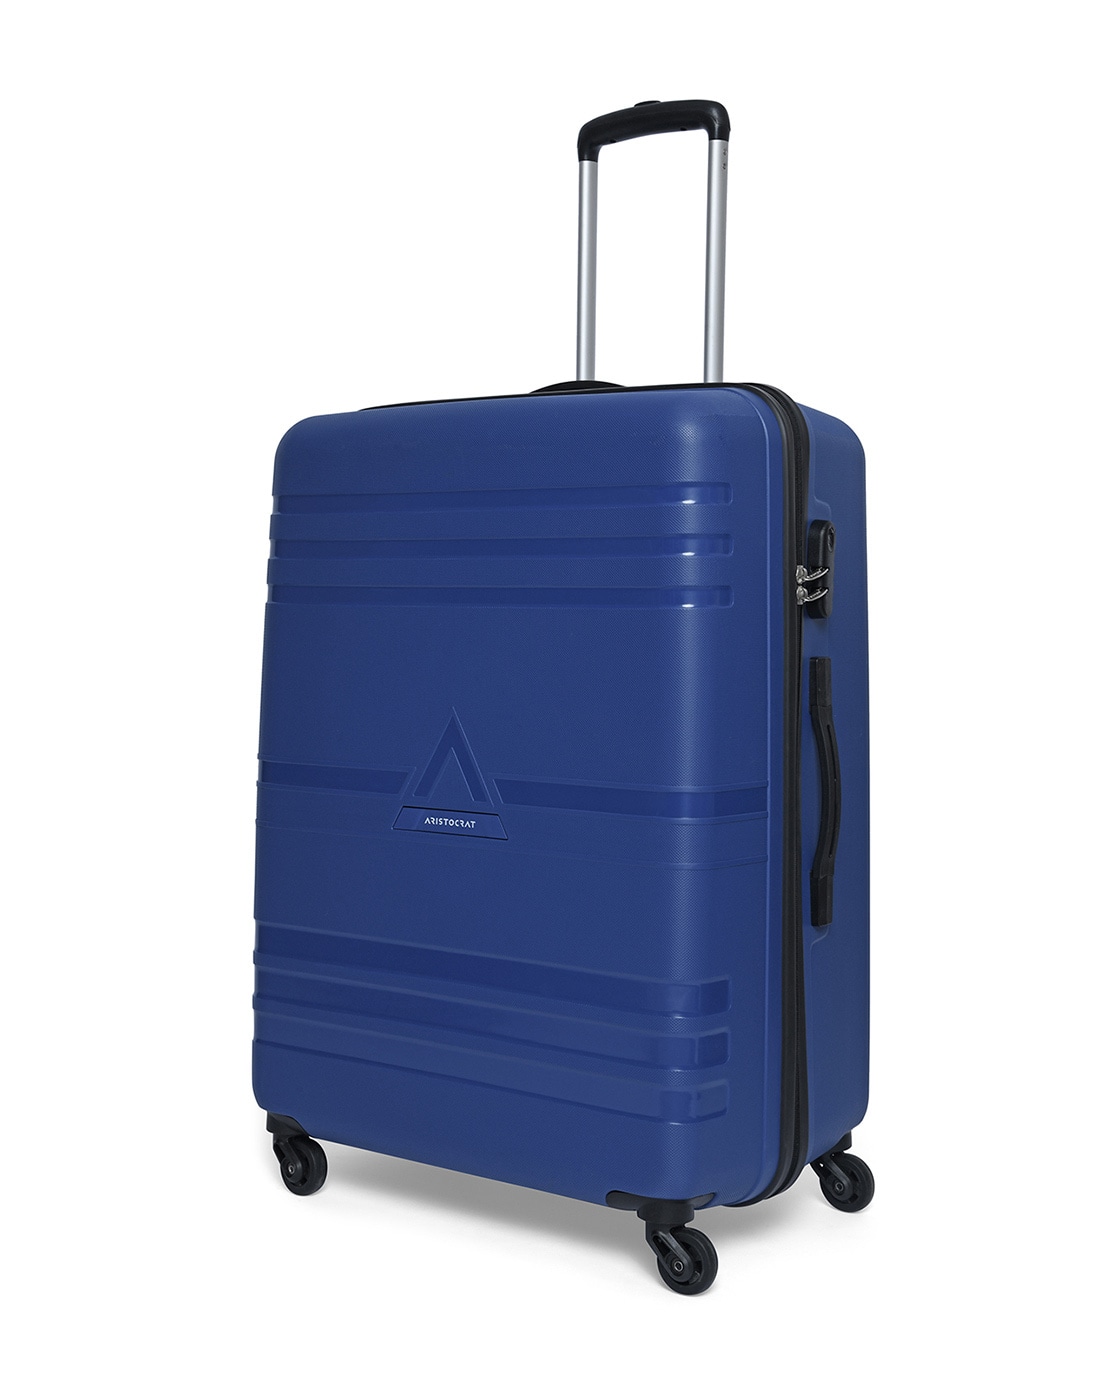 Aristocrat Luggage Bag in Mumbai - Dealers, Manufacturers & Suppliers -  Justdial